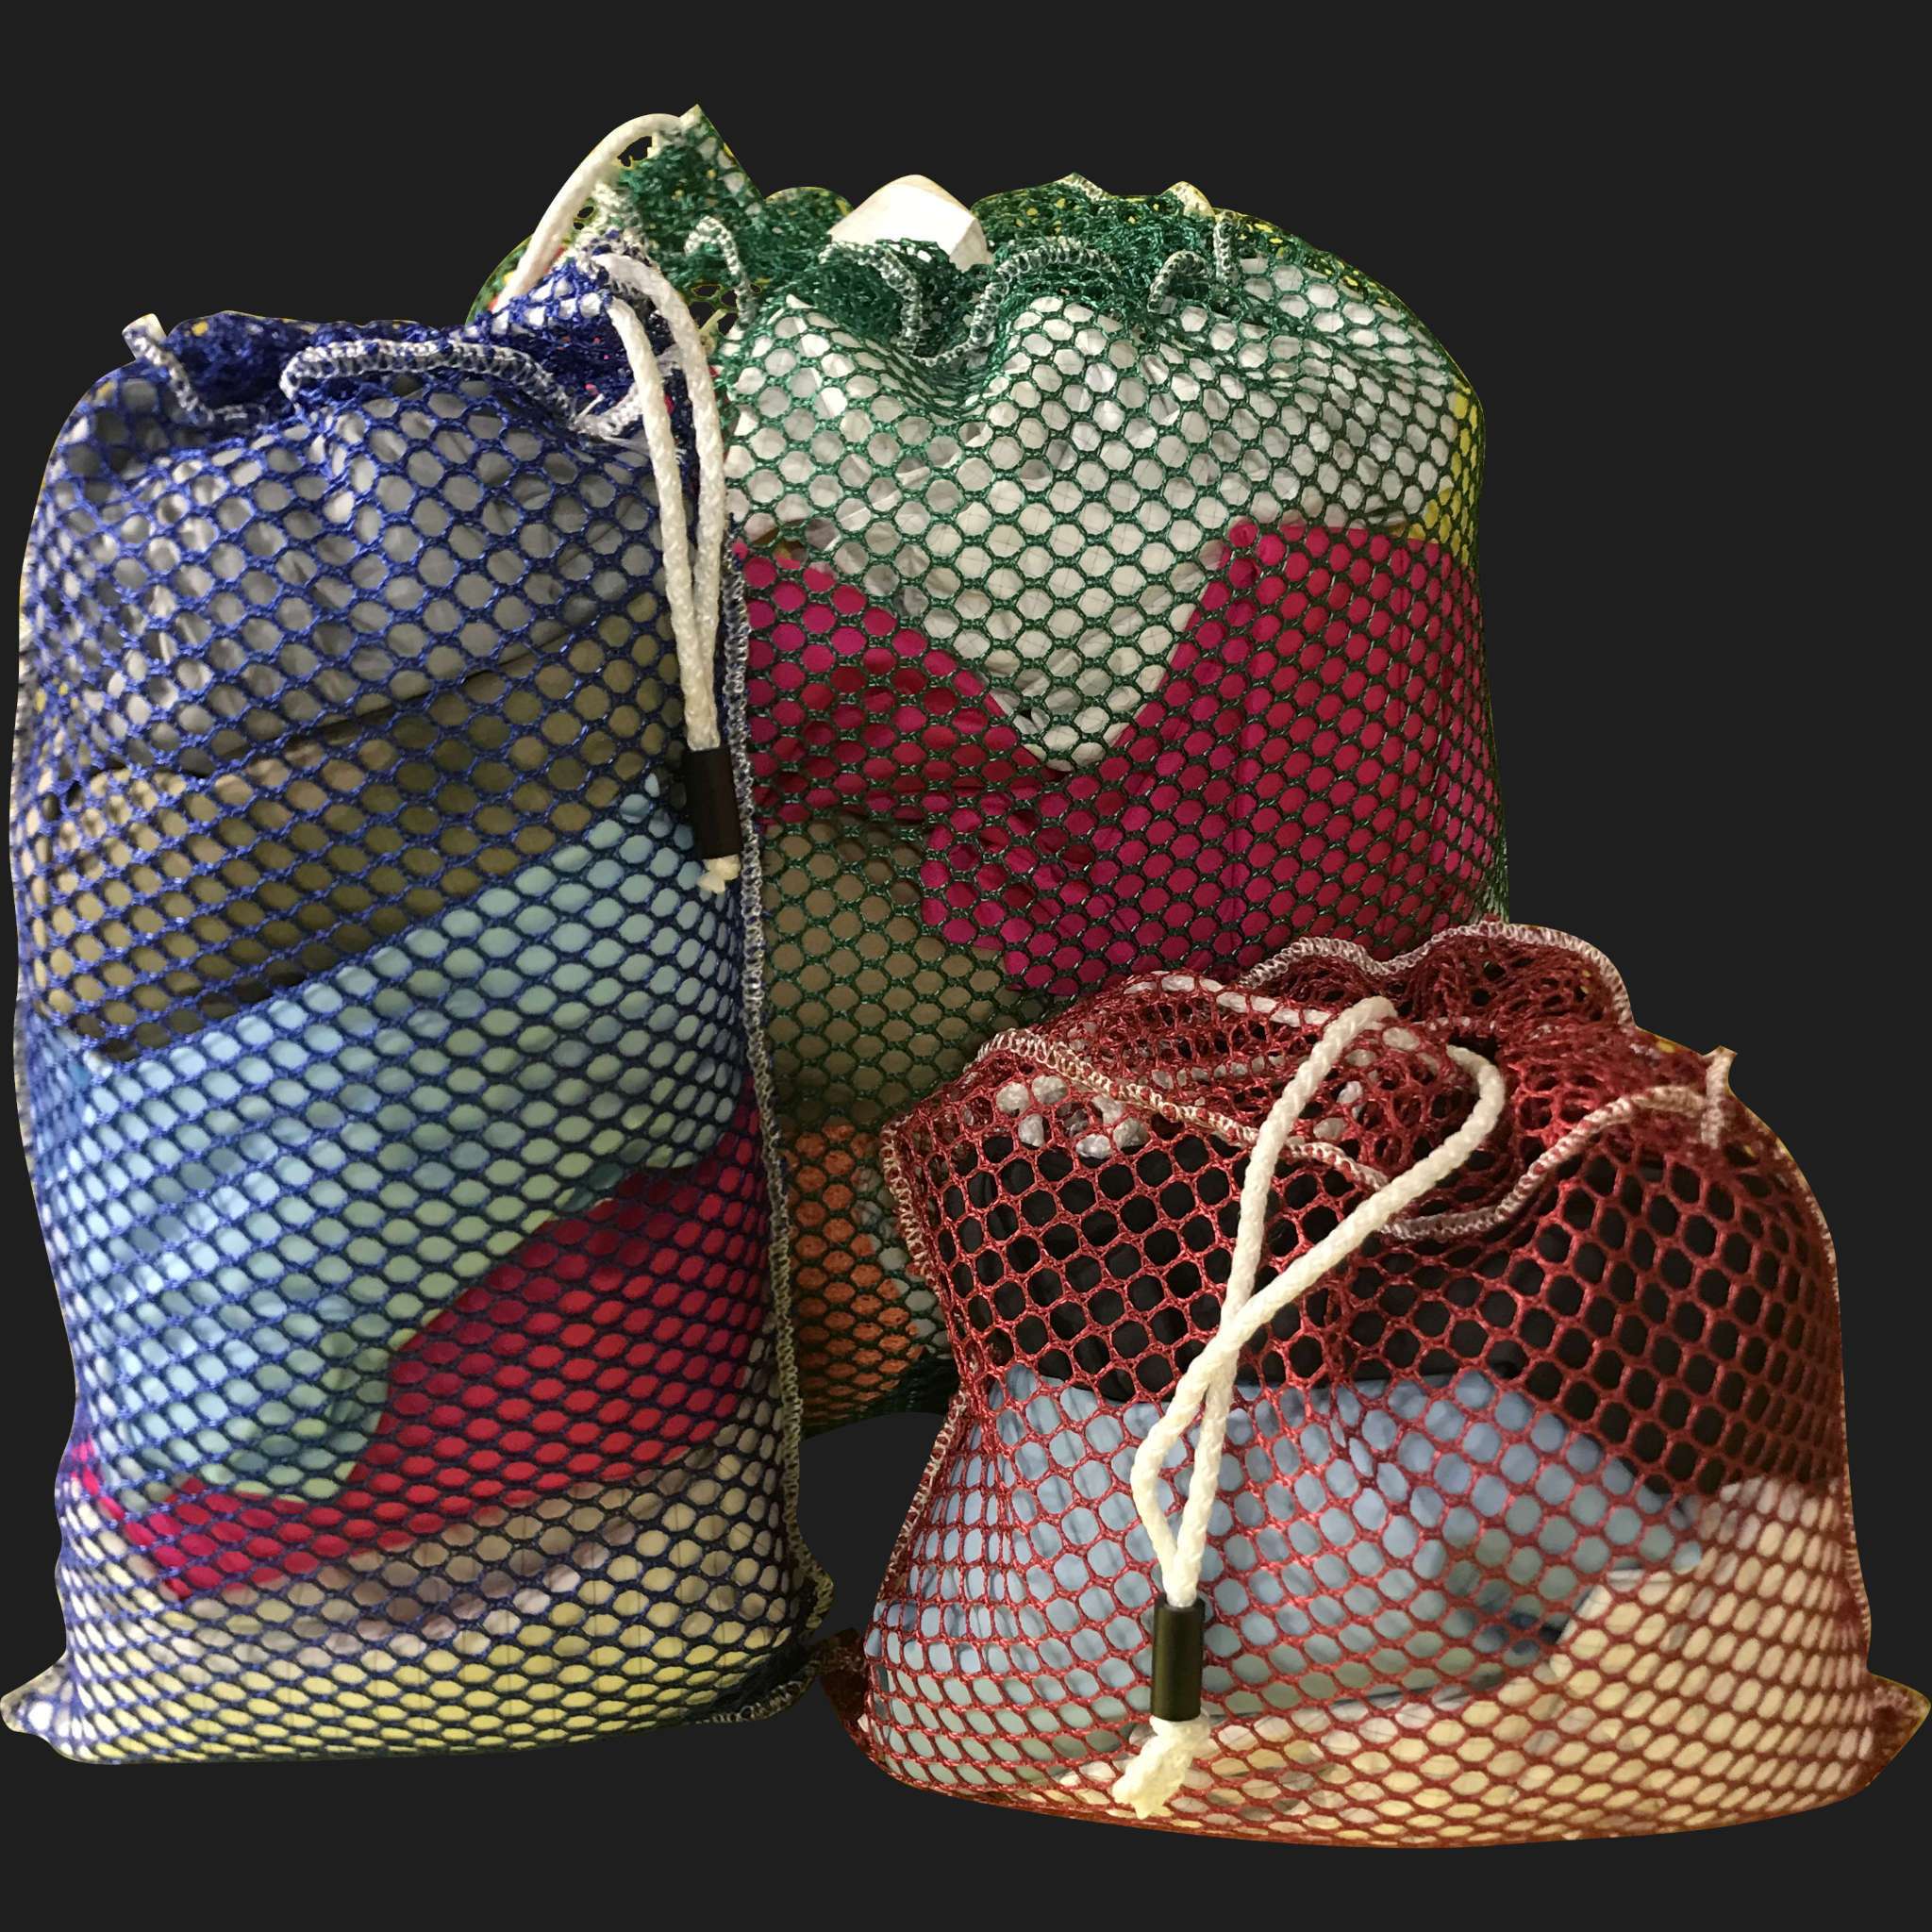 16" x 38" Customized Mesh-Net-Laundry Bags Heavy Duty with Cord and barrellock closure